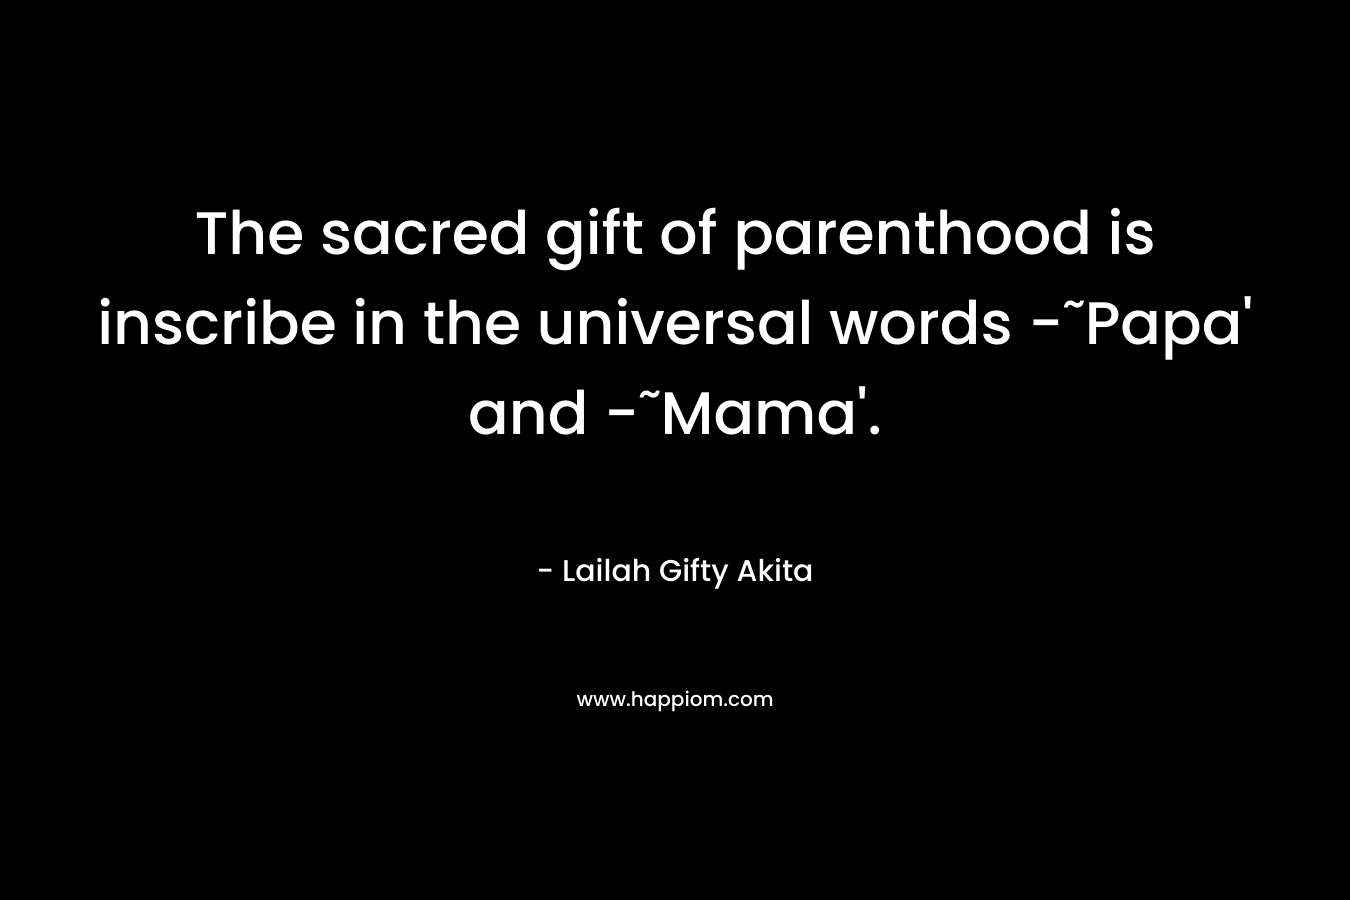 The sacred gift of parenthood is inscribe in the universal words -˜Papa’ and -˜Mama’. – Lailah Gifty Akita